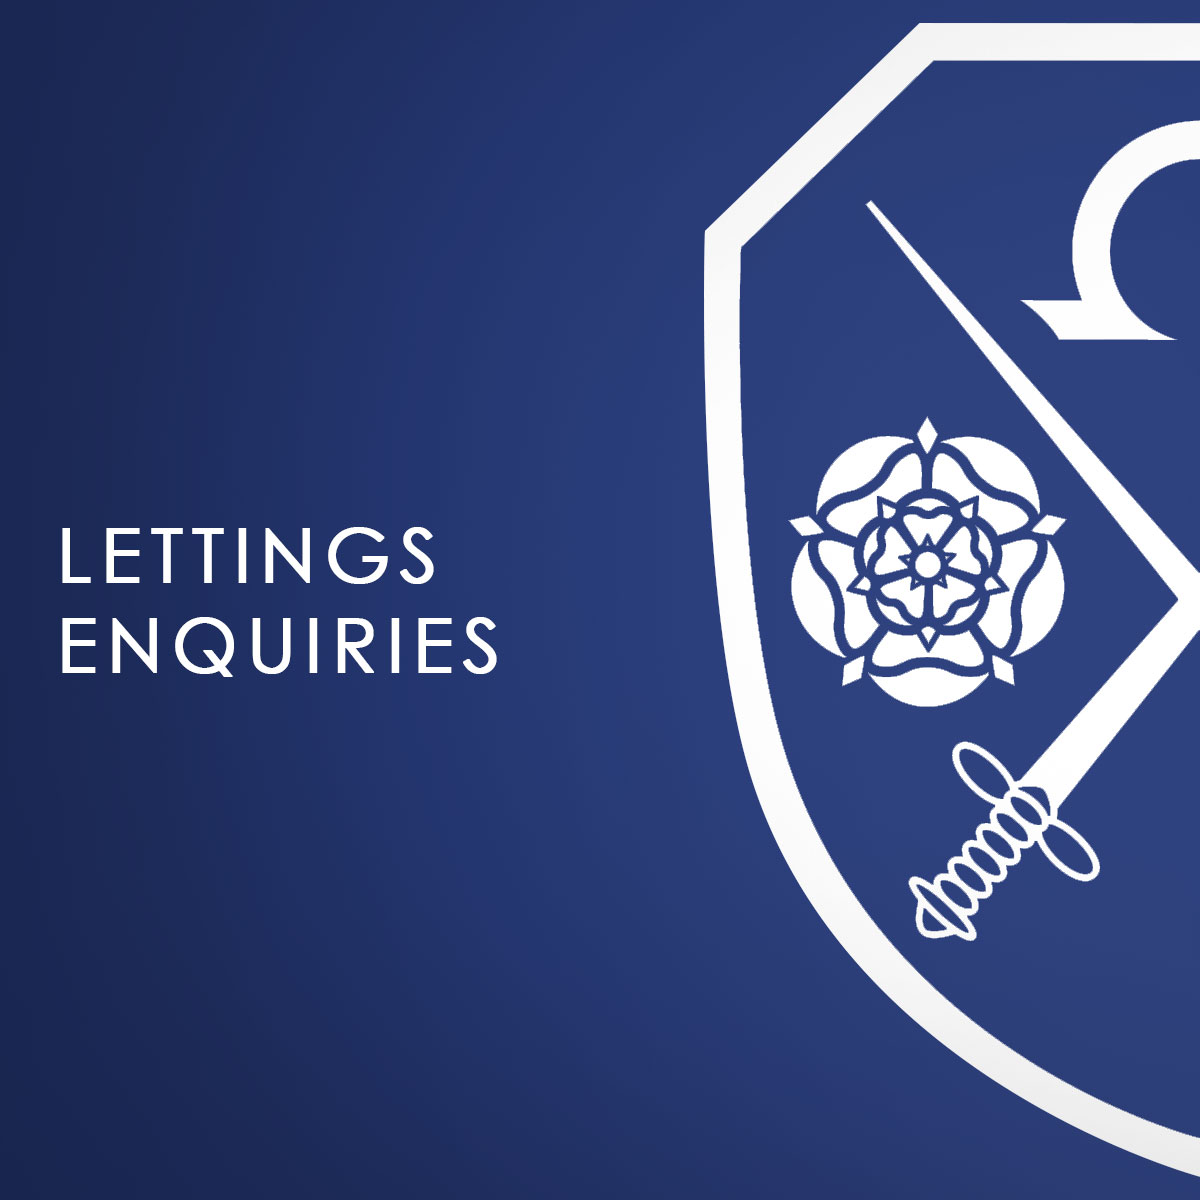 A blue background with the East Barnet School logo which says about Lettings Enquiries